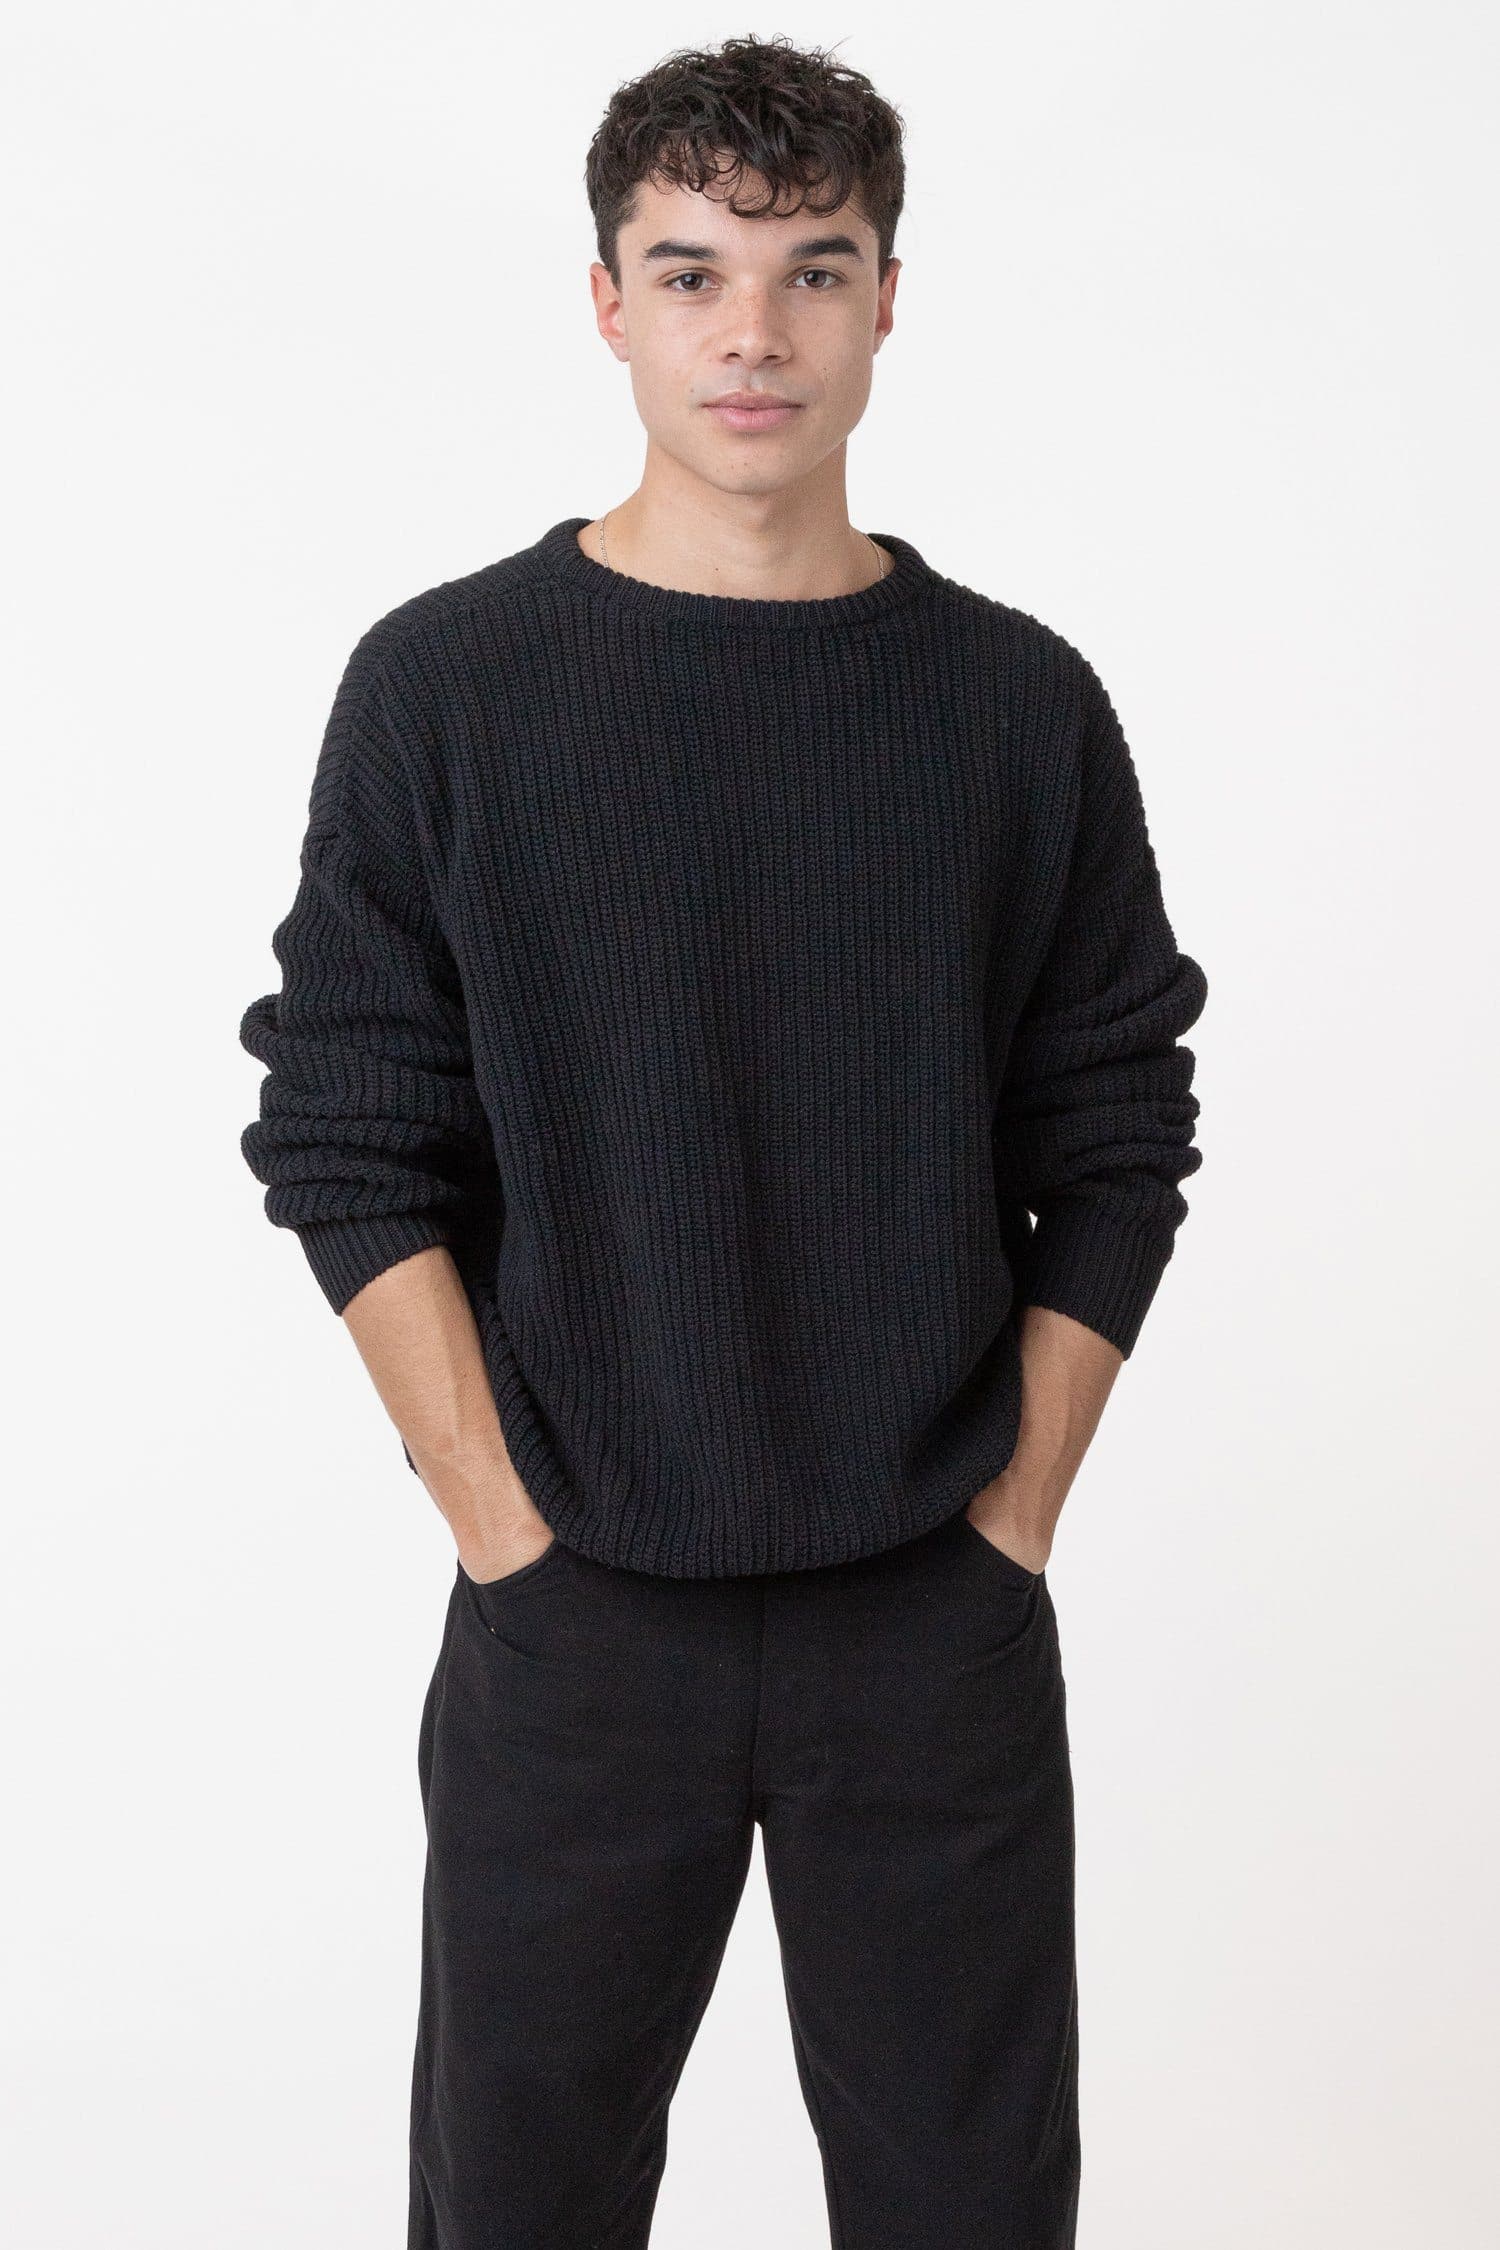  Men's Long Sleeve Cable Knit Pullover Sweater Fisherman Twist  Patterned Crewneck Sweater Black : Clothing, Shoes & Jewelry